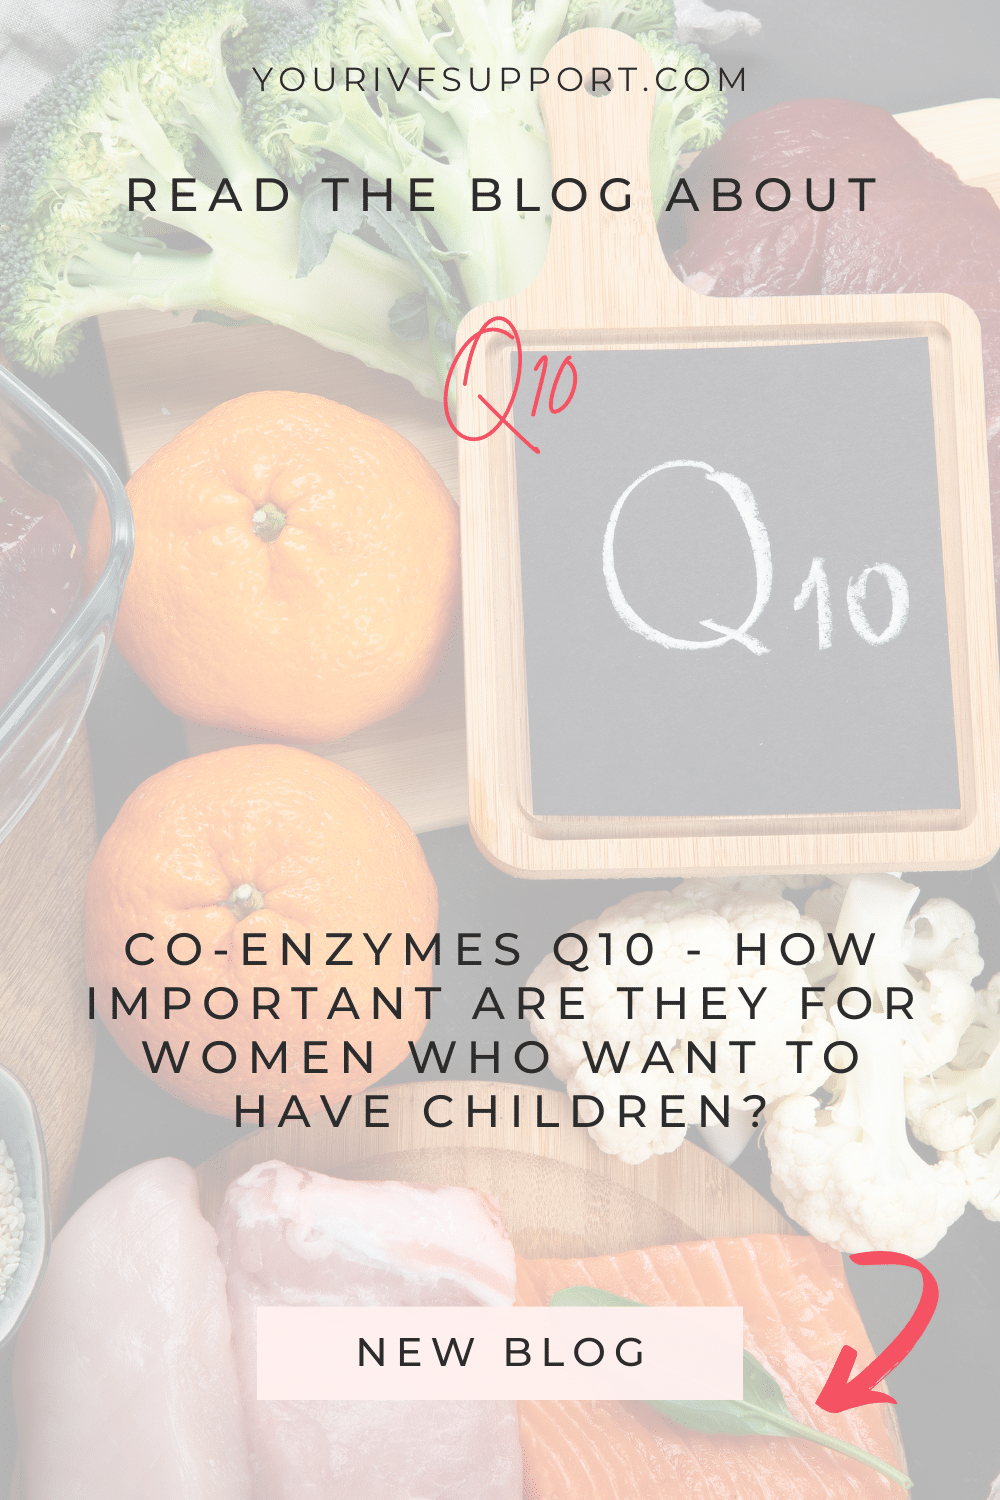 Co-enzymes Q10 and Fertility